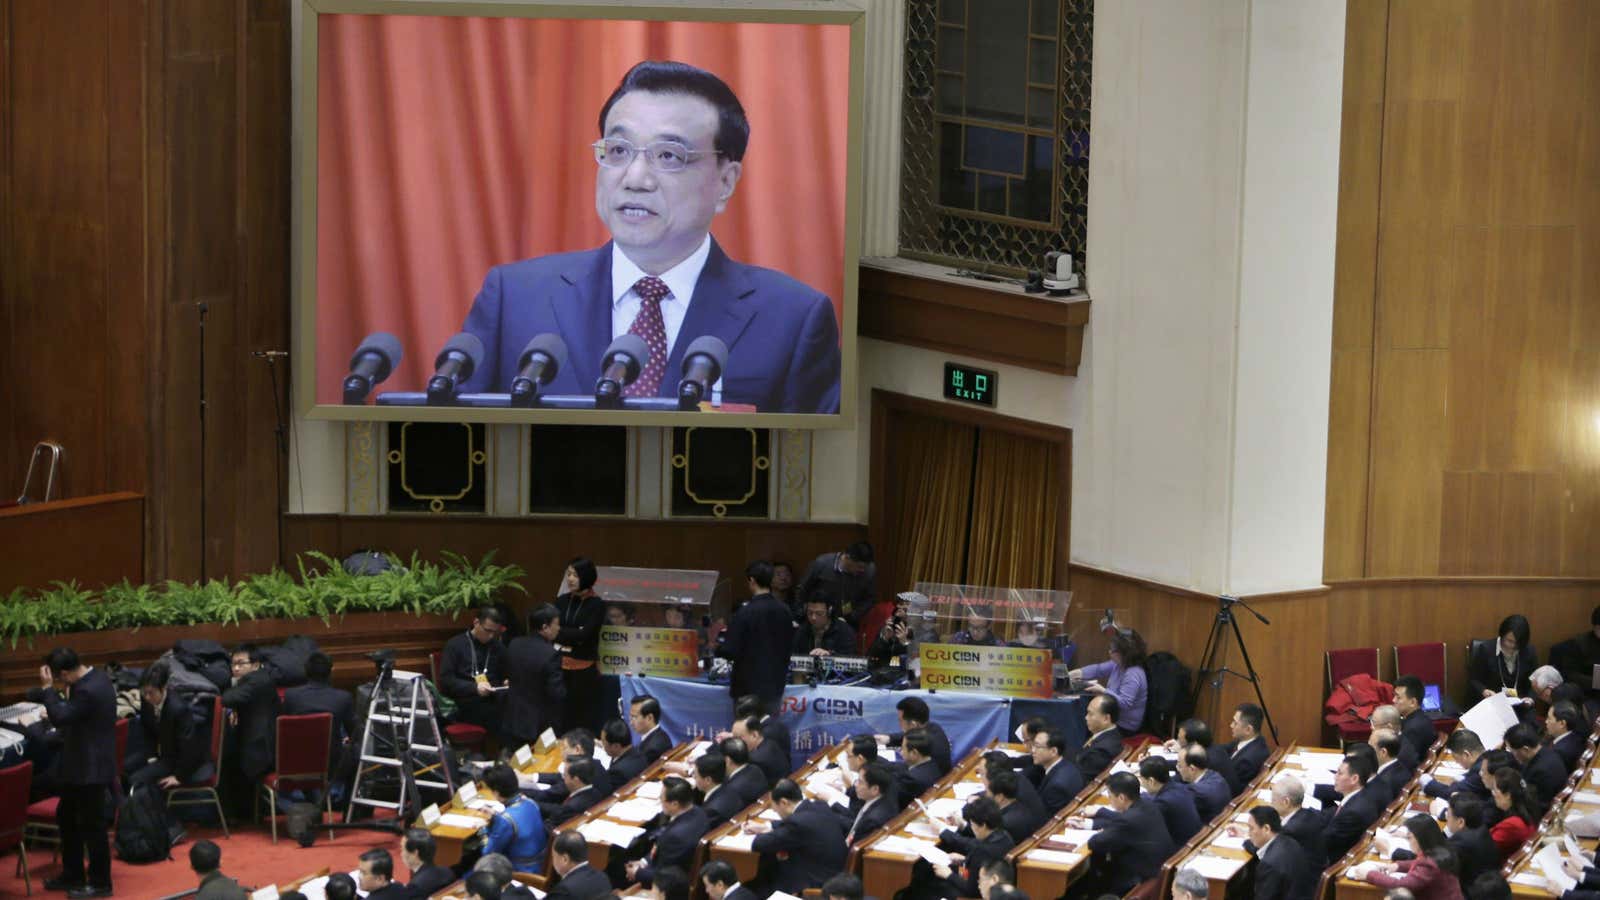 Chinese Premier Li Keqiang speaks at the National People’s Congress in Beijing.